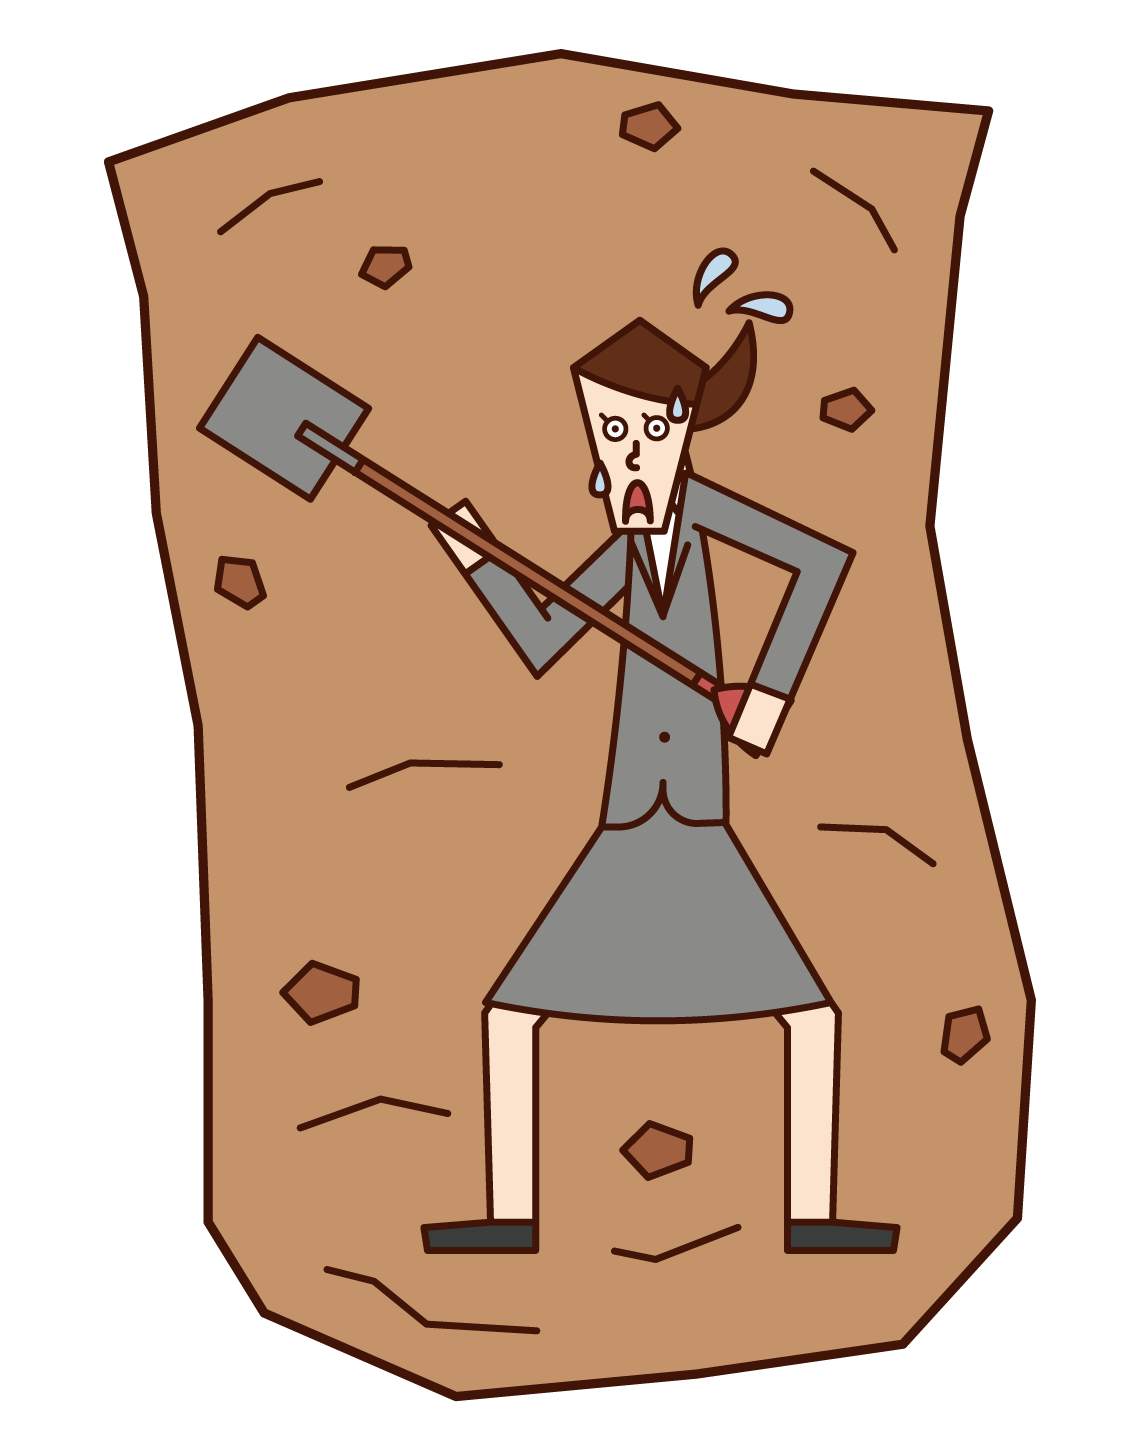 Illustration of a woman digging a hole in search of a gold vein